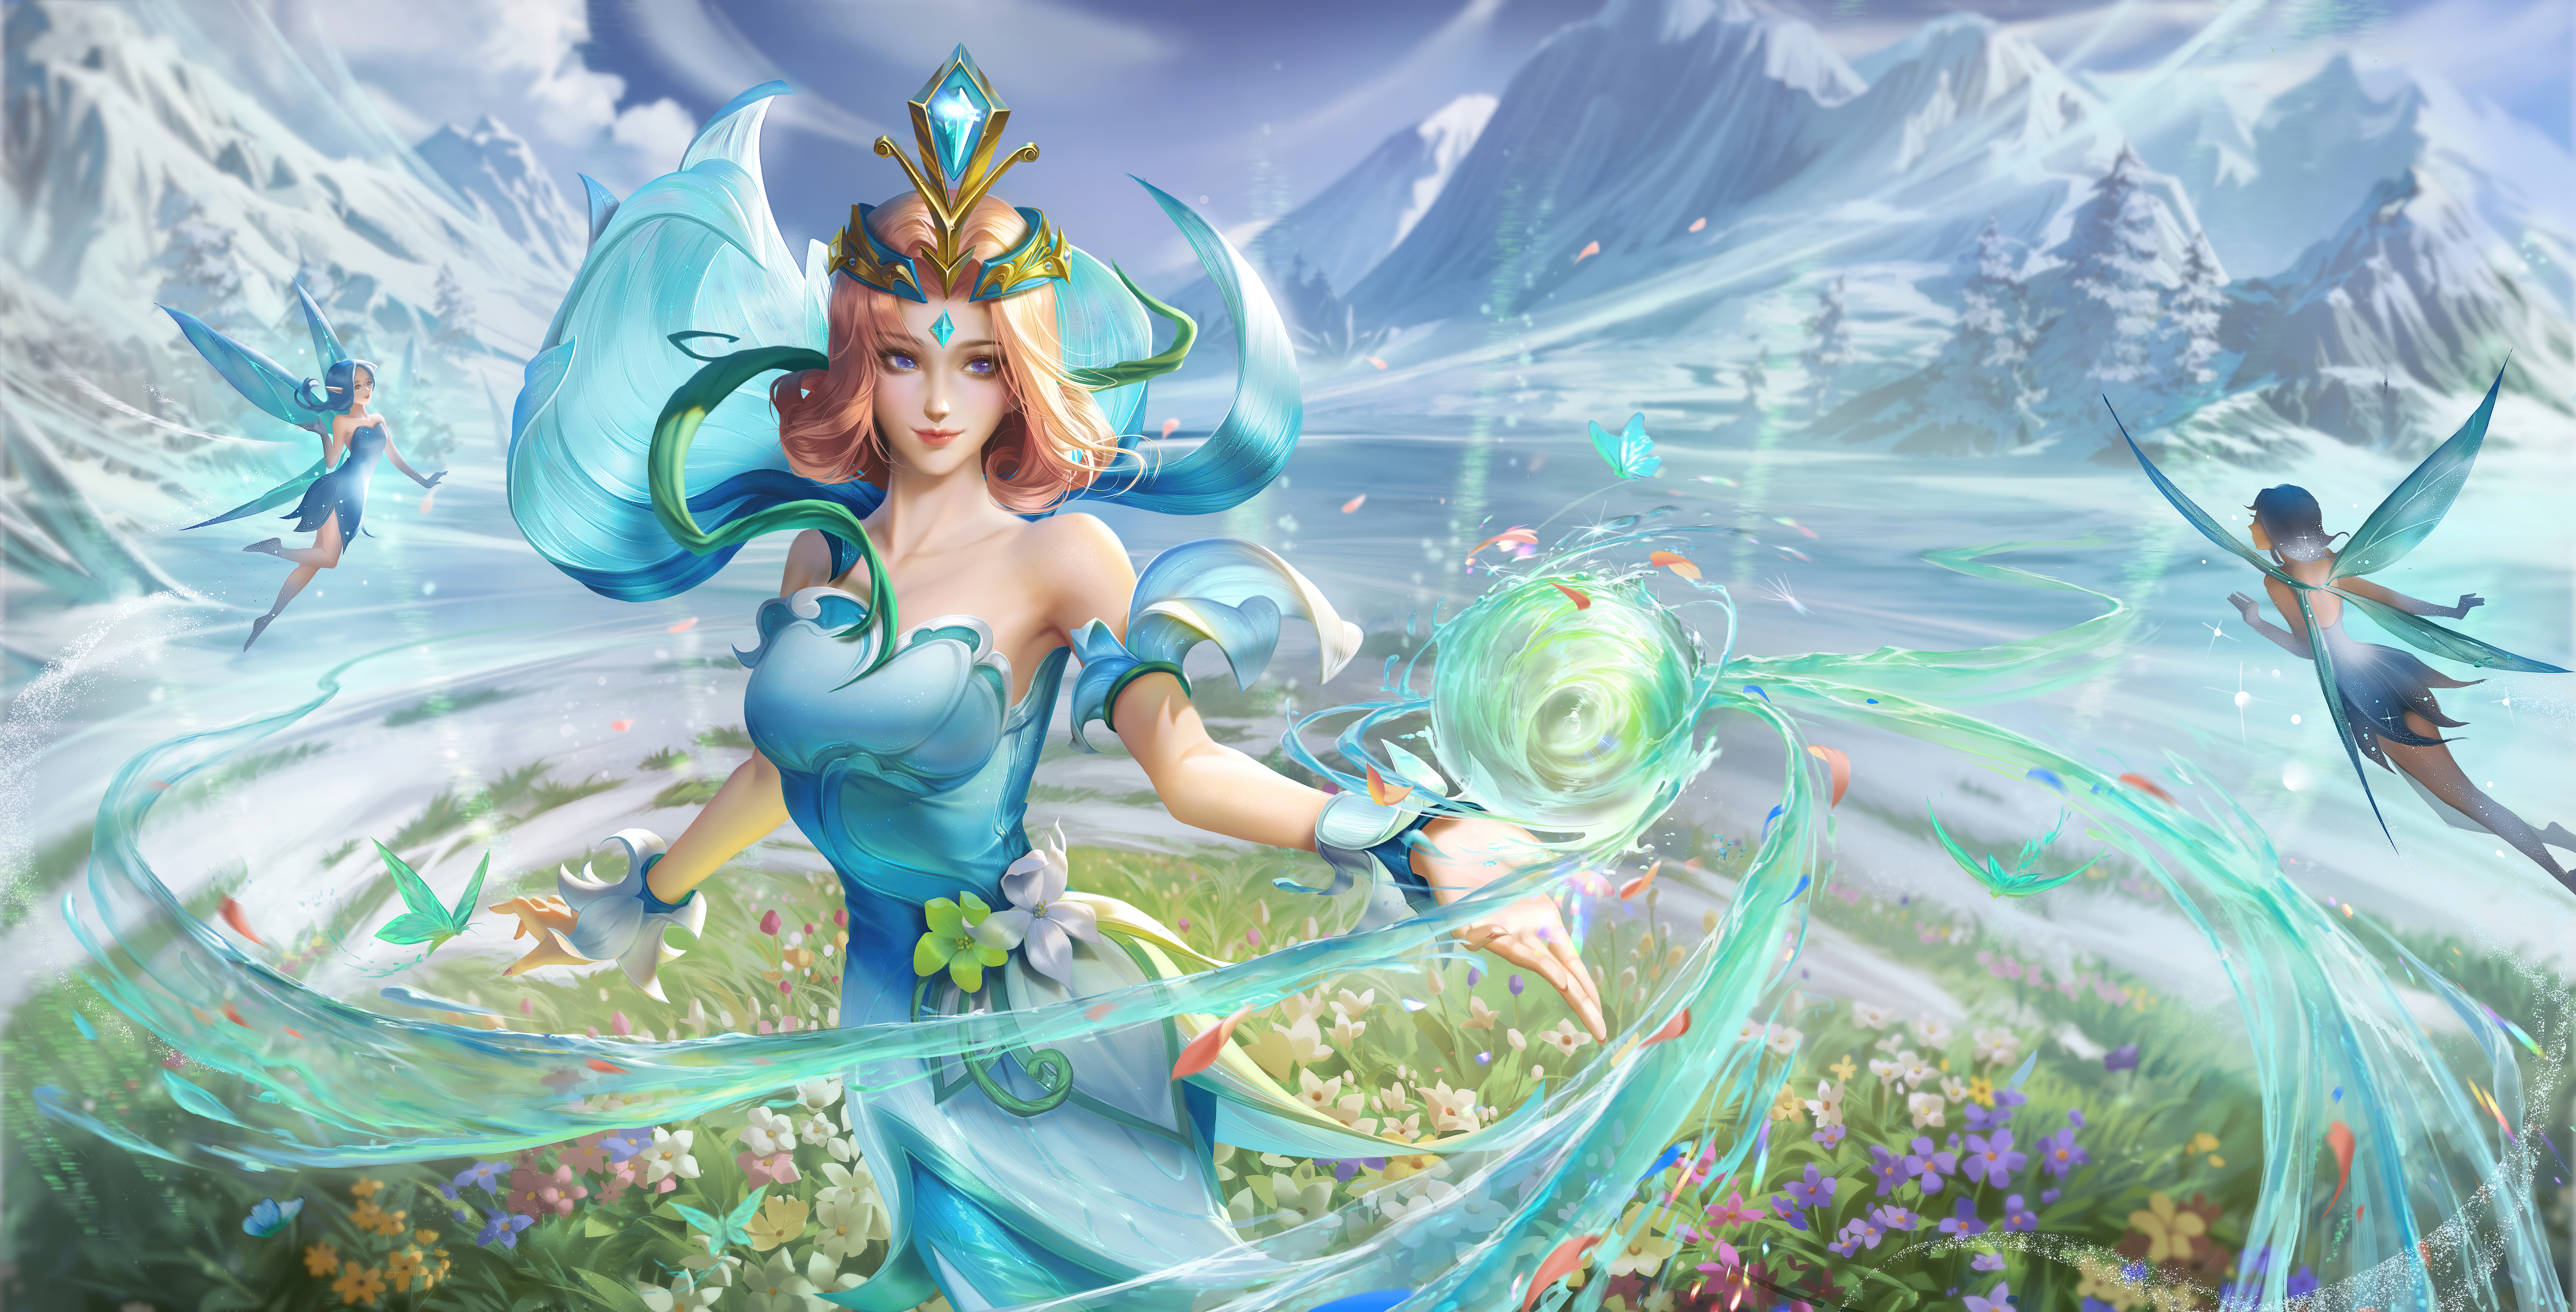 General 8485x4320 Honor of Kings video game characters video game girls women fantasy art video game art dress cyan dress fairies mountains flowers blonde PC gaming video games